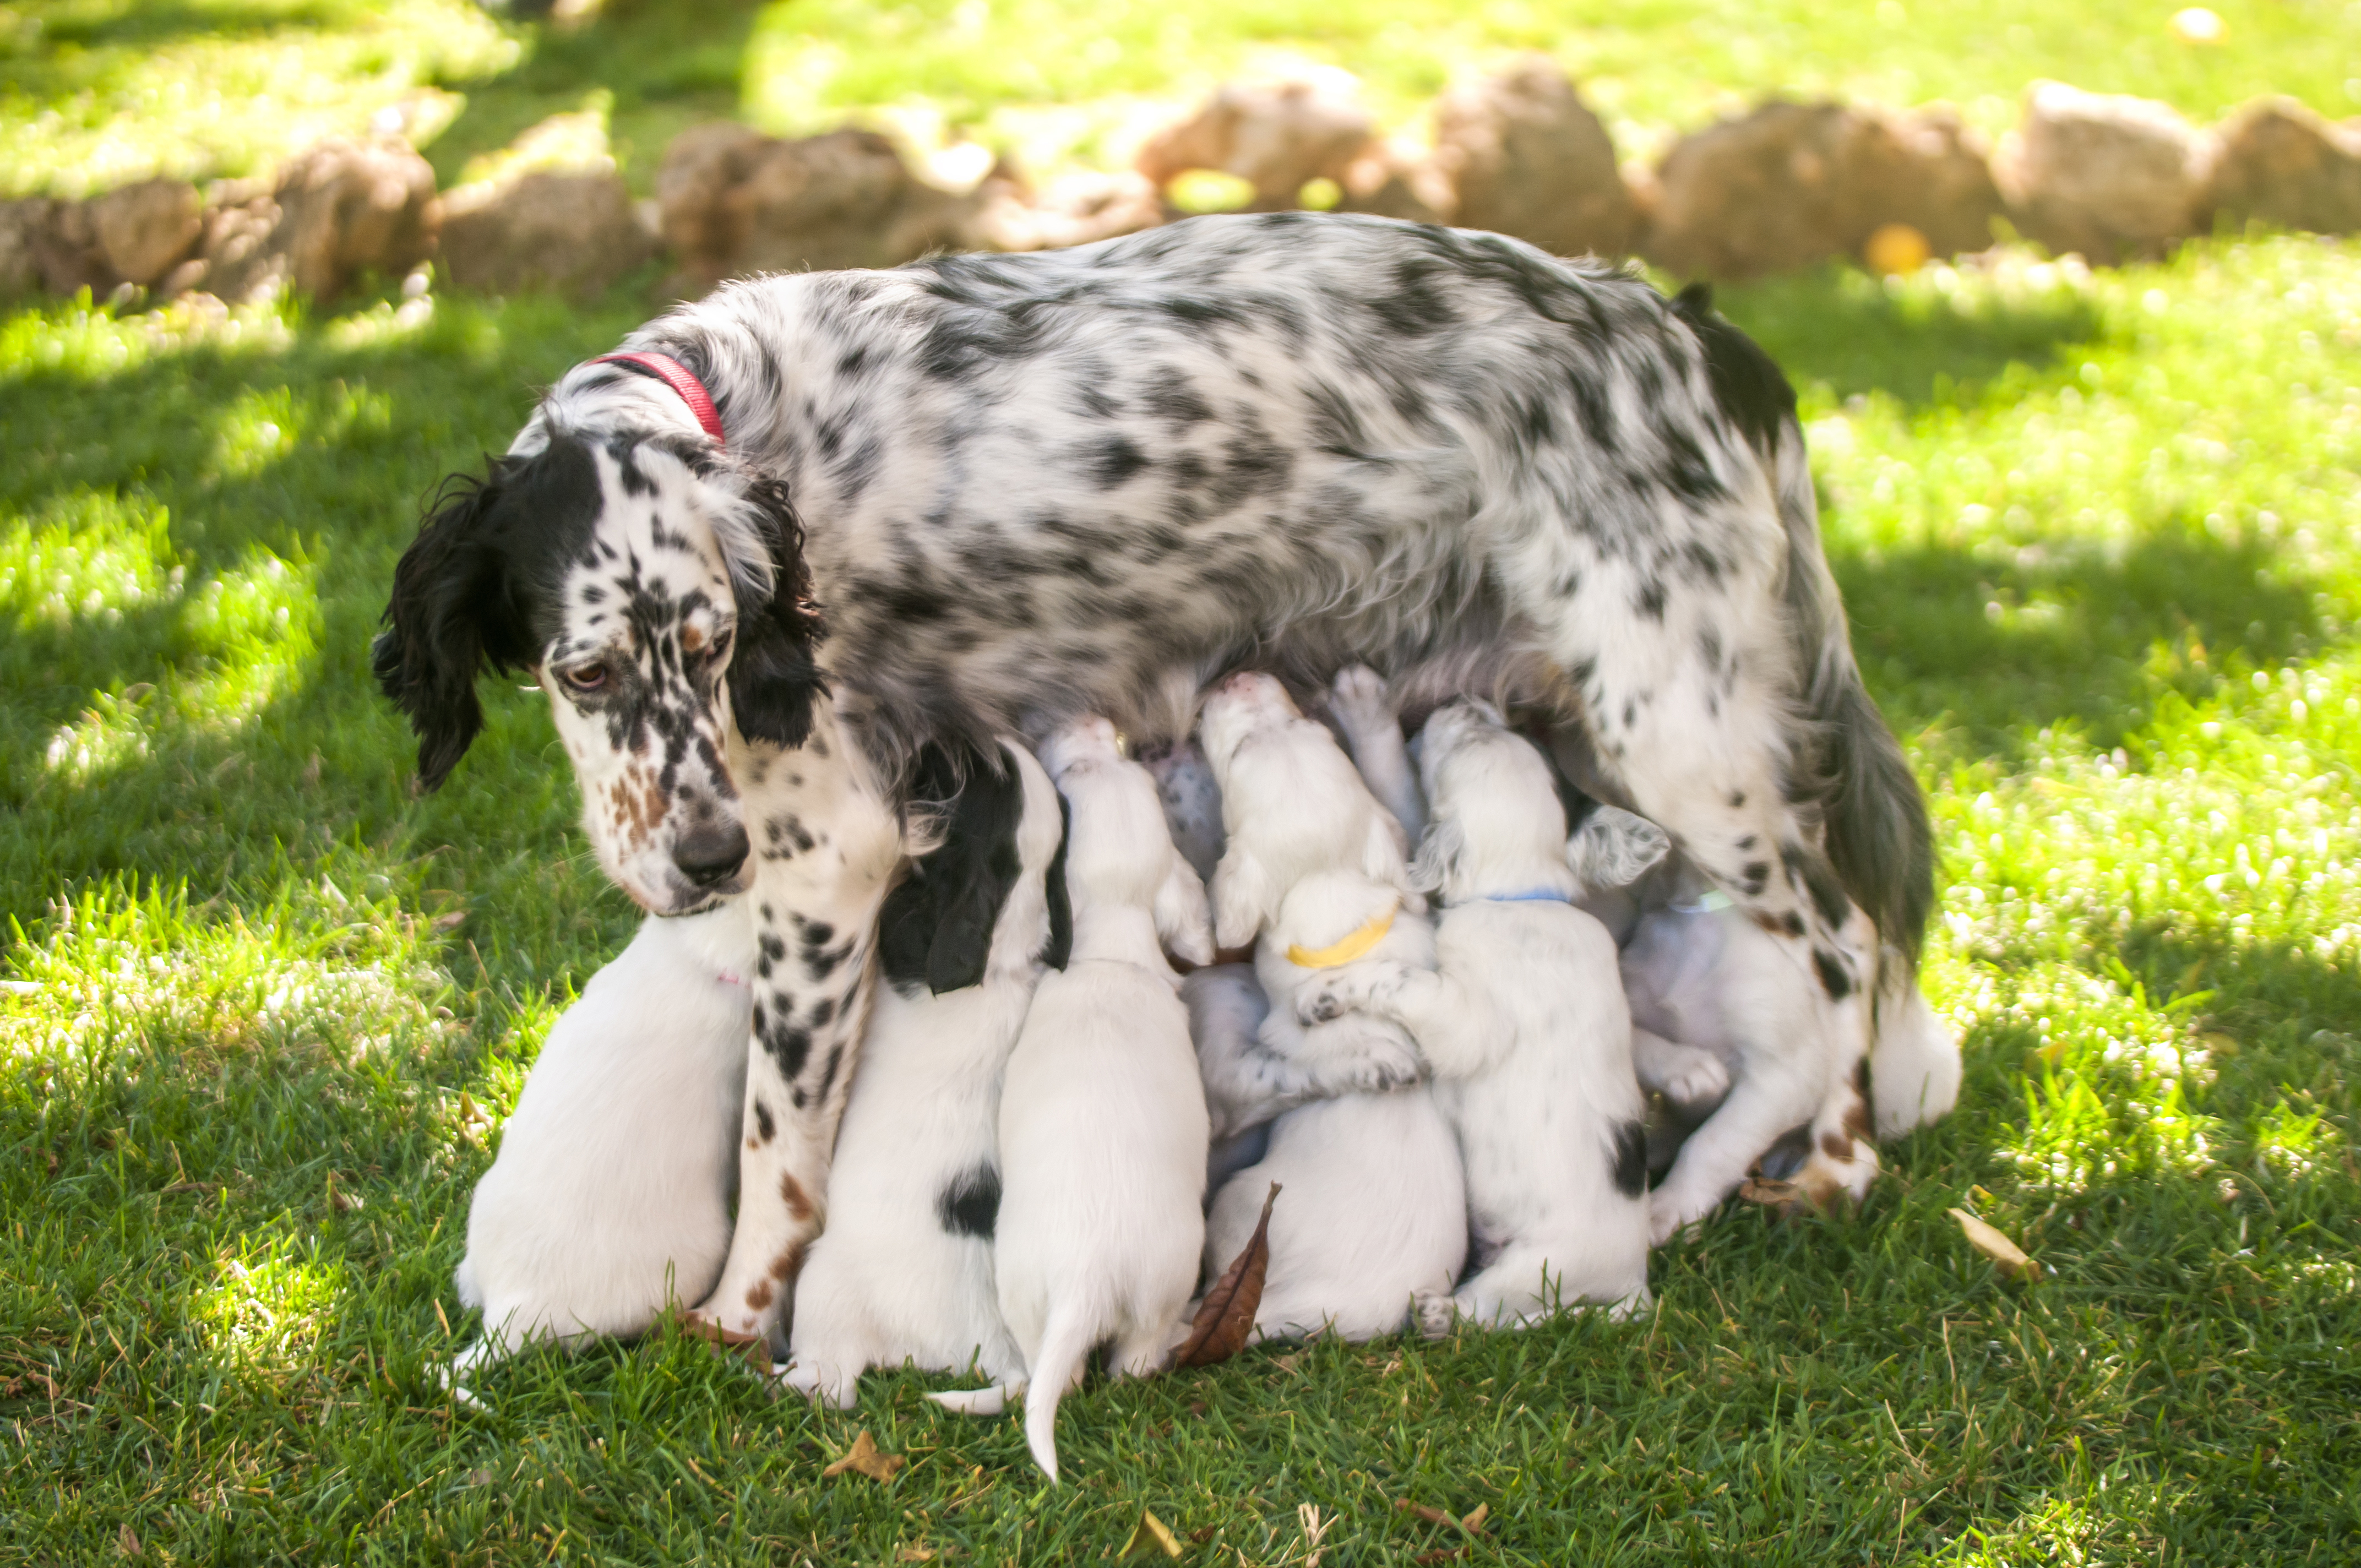 how do you know when a dog has finished giving birth